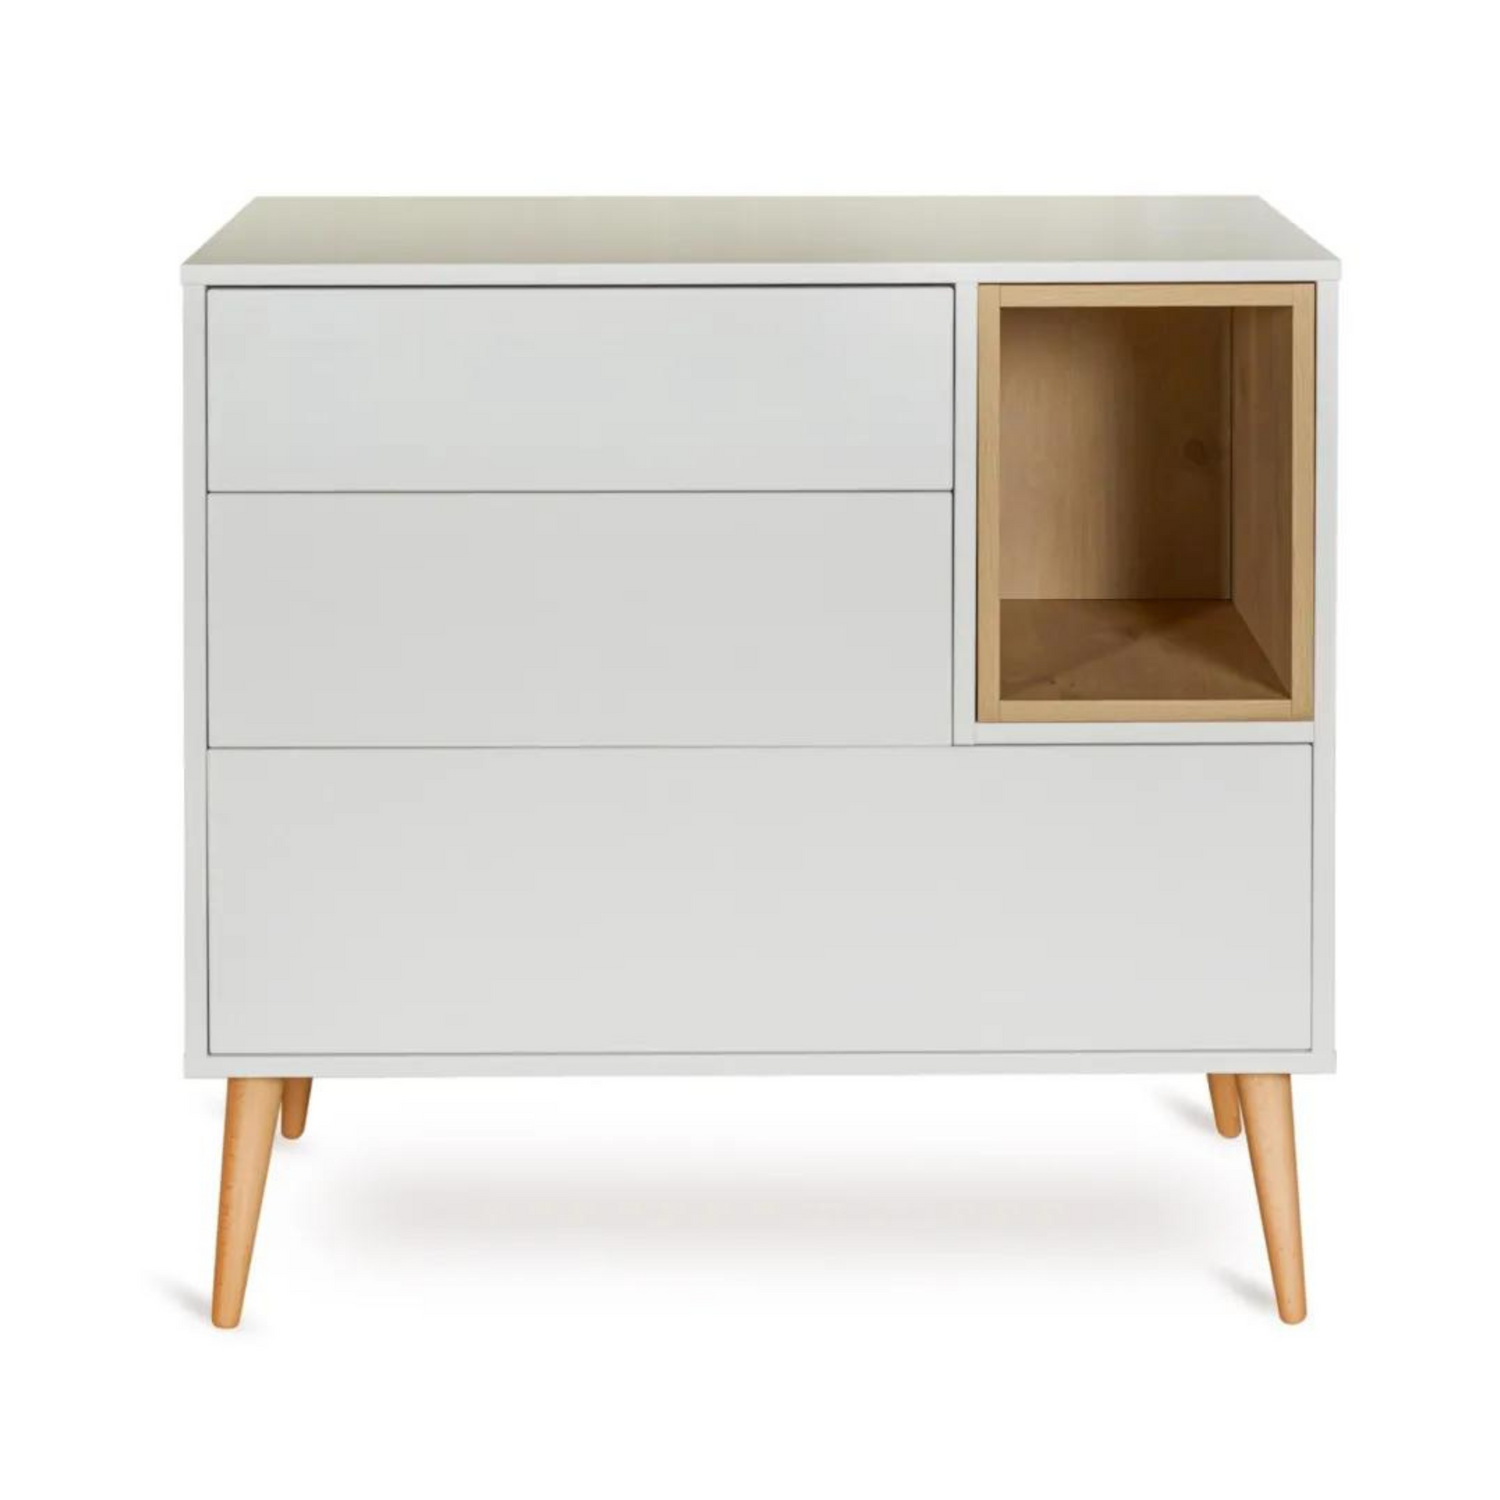 Quax chest of drawers Cocoon Latte